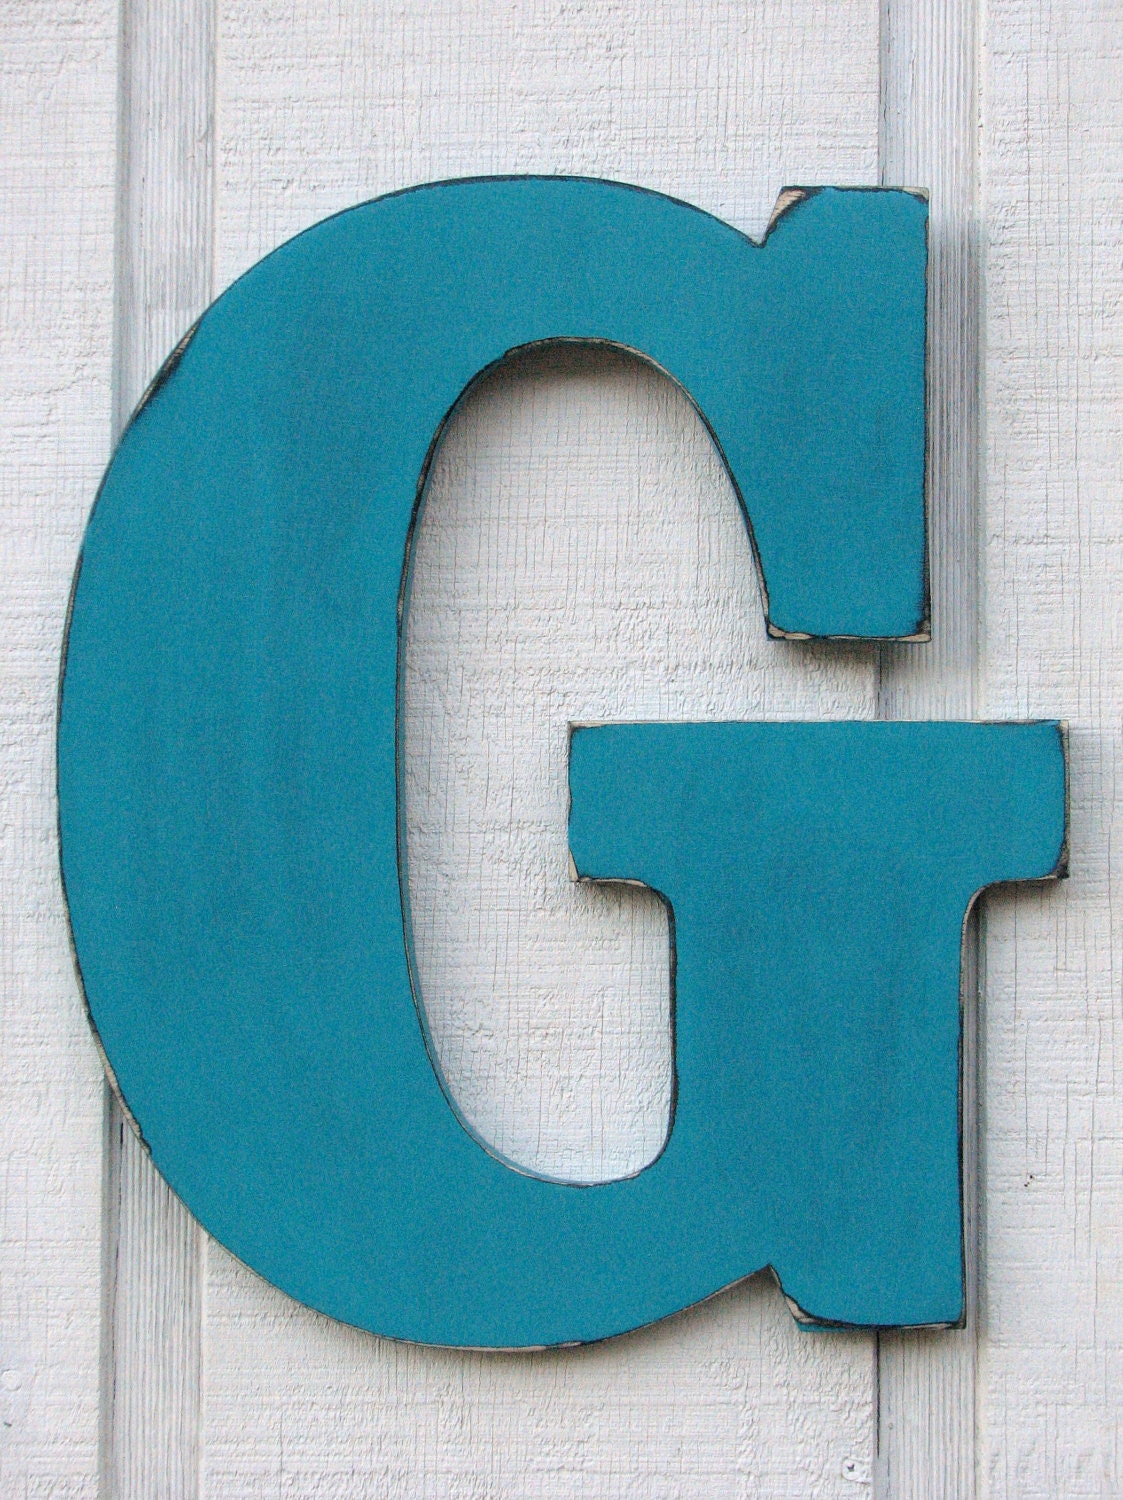 Guestbook Large Wall Letters Rustic Wooden Letter G Distressed in Island Green,18" tall Wood Name Letters, Custom Wedding Gift